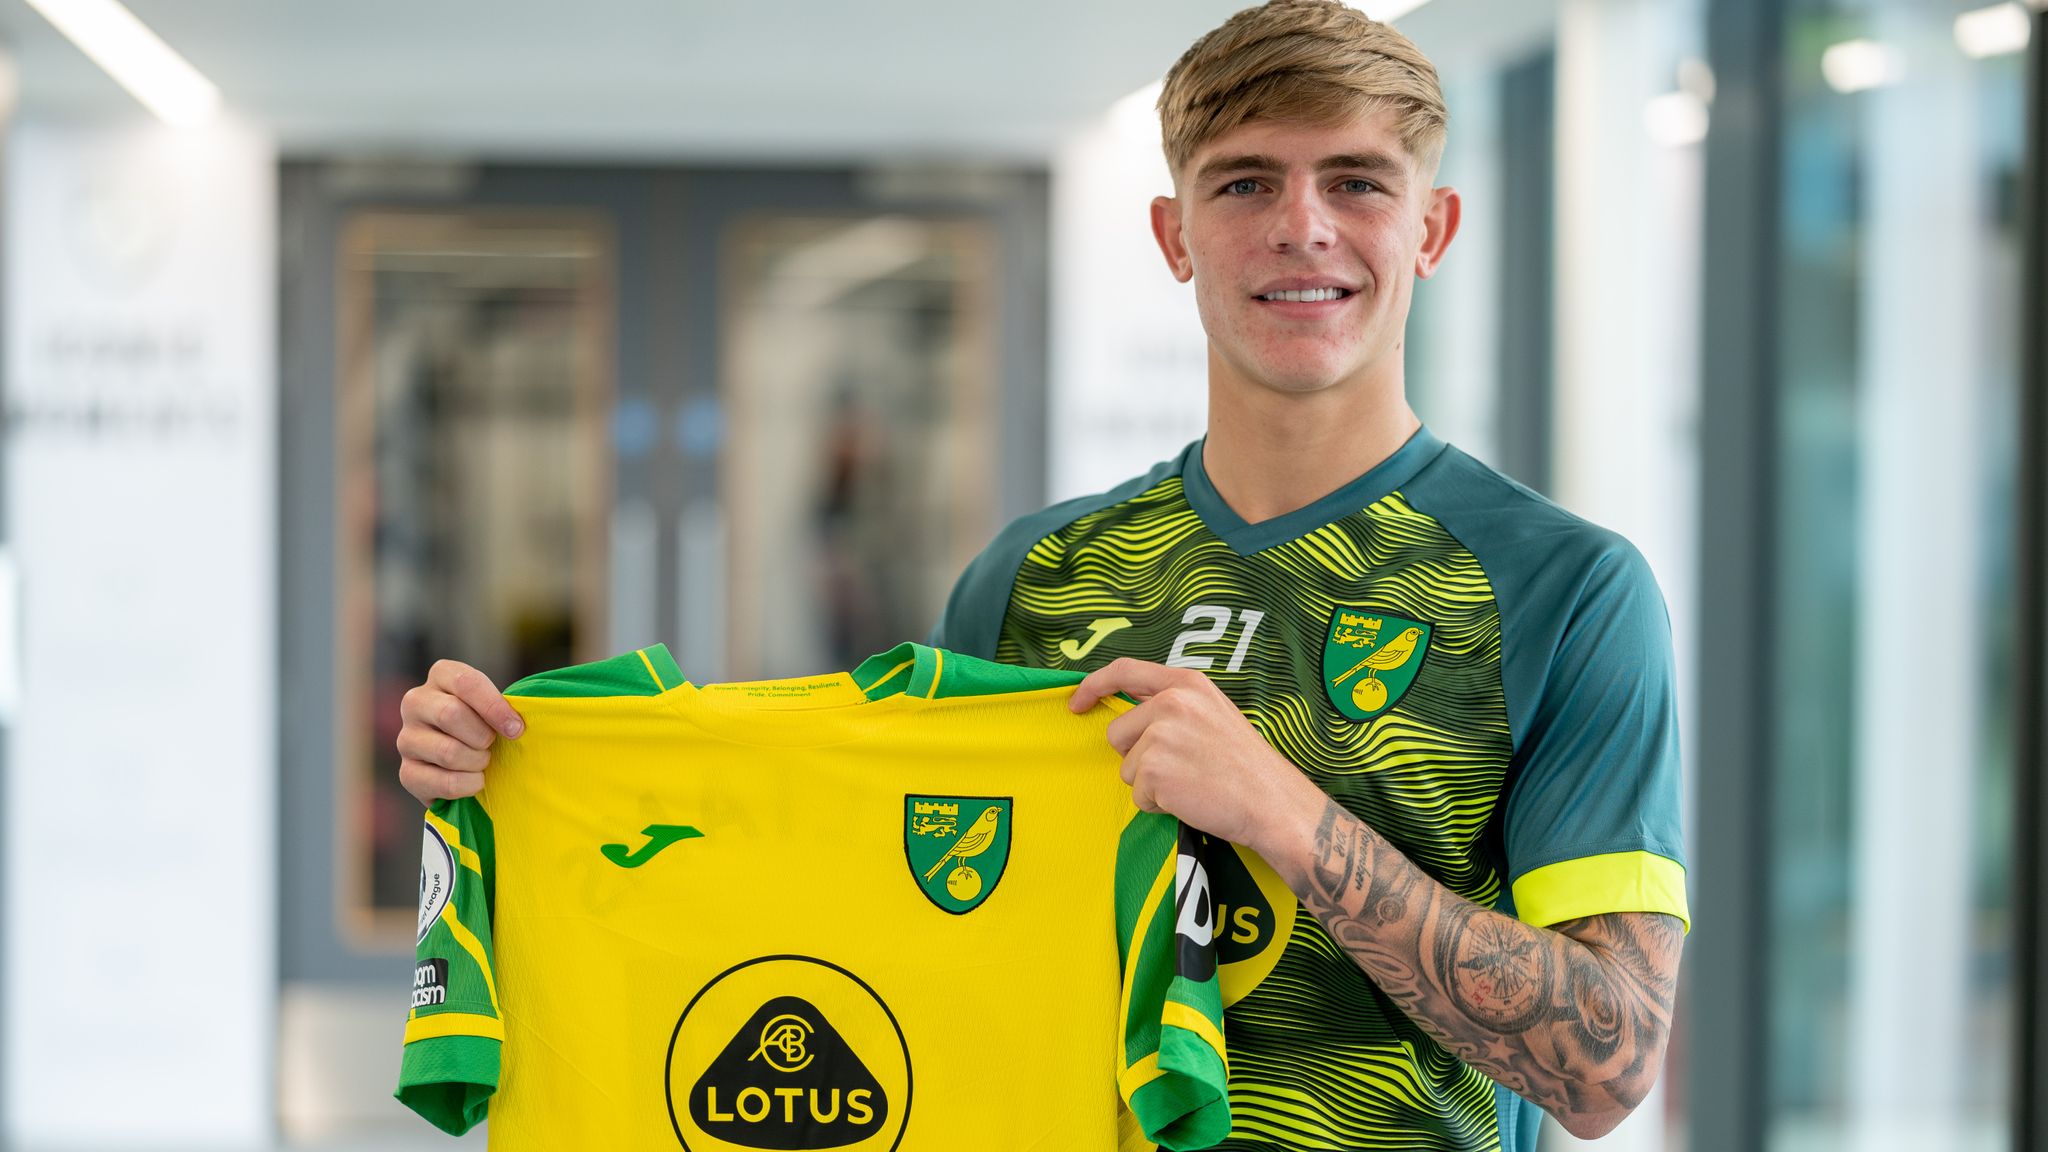 Premier League: Manchester United loanee Brandon Williams issues STATEMENT over deleted Norwich City Instagram post, says "I was taunted and abused by fans" - Check out